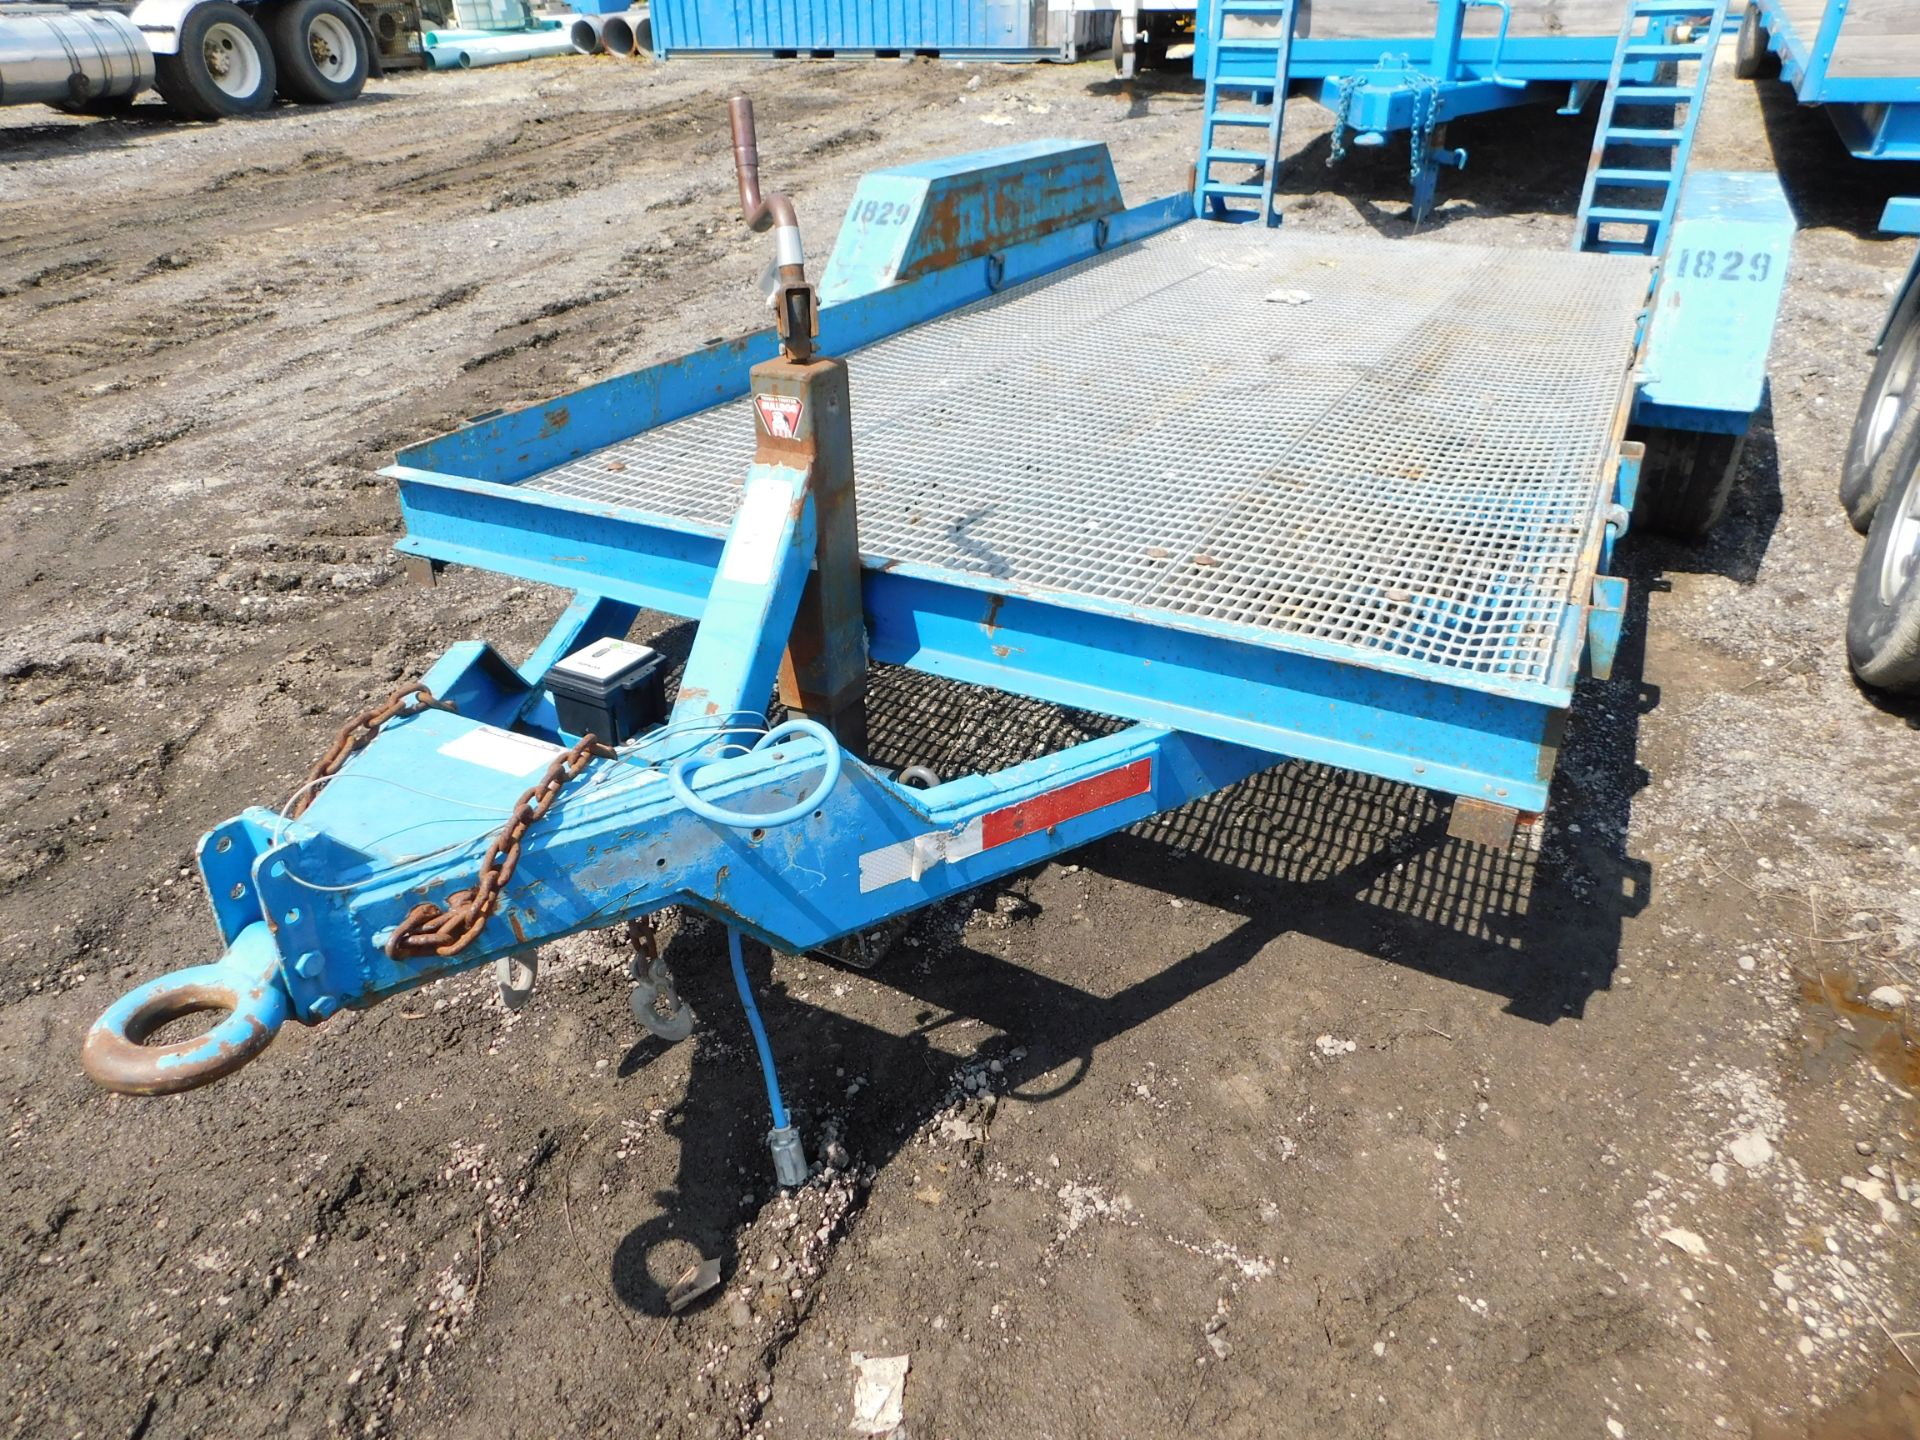 7'W x 15' Long Trailer with Grated Deck, Pintle Hitch, Ramps, Tandem Axle - Image 8 of 9